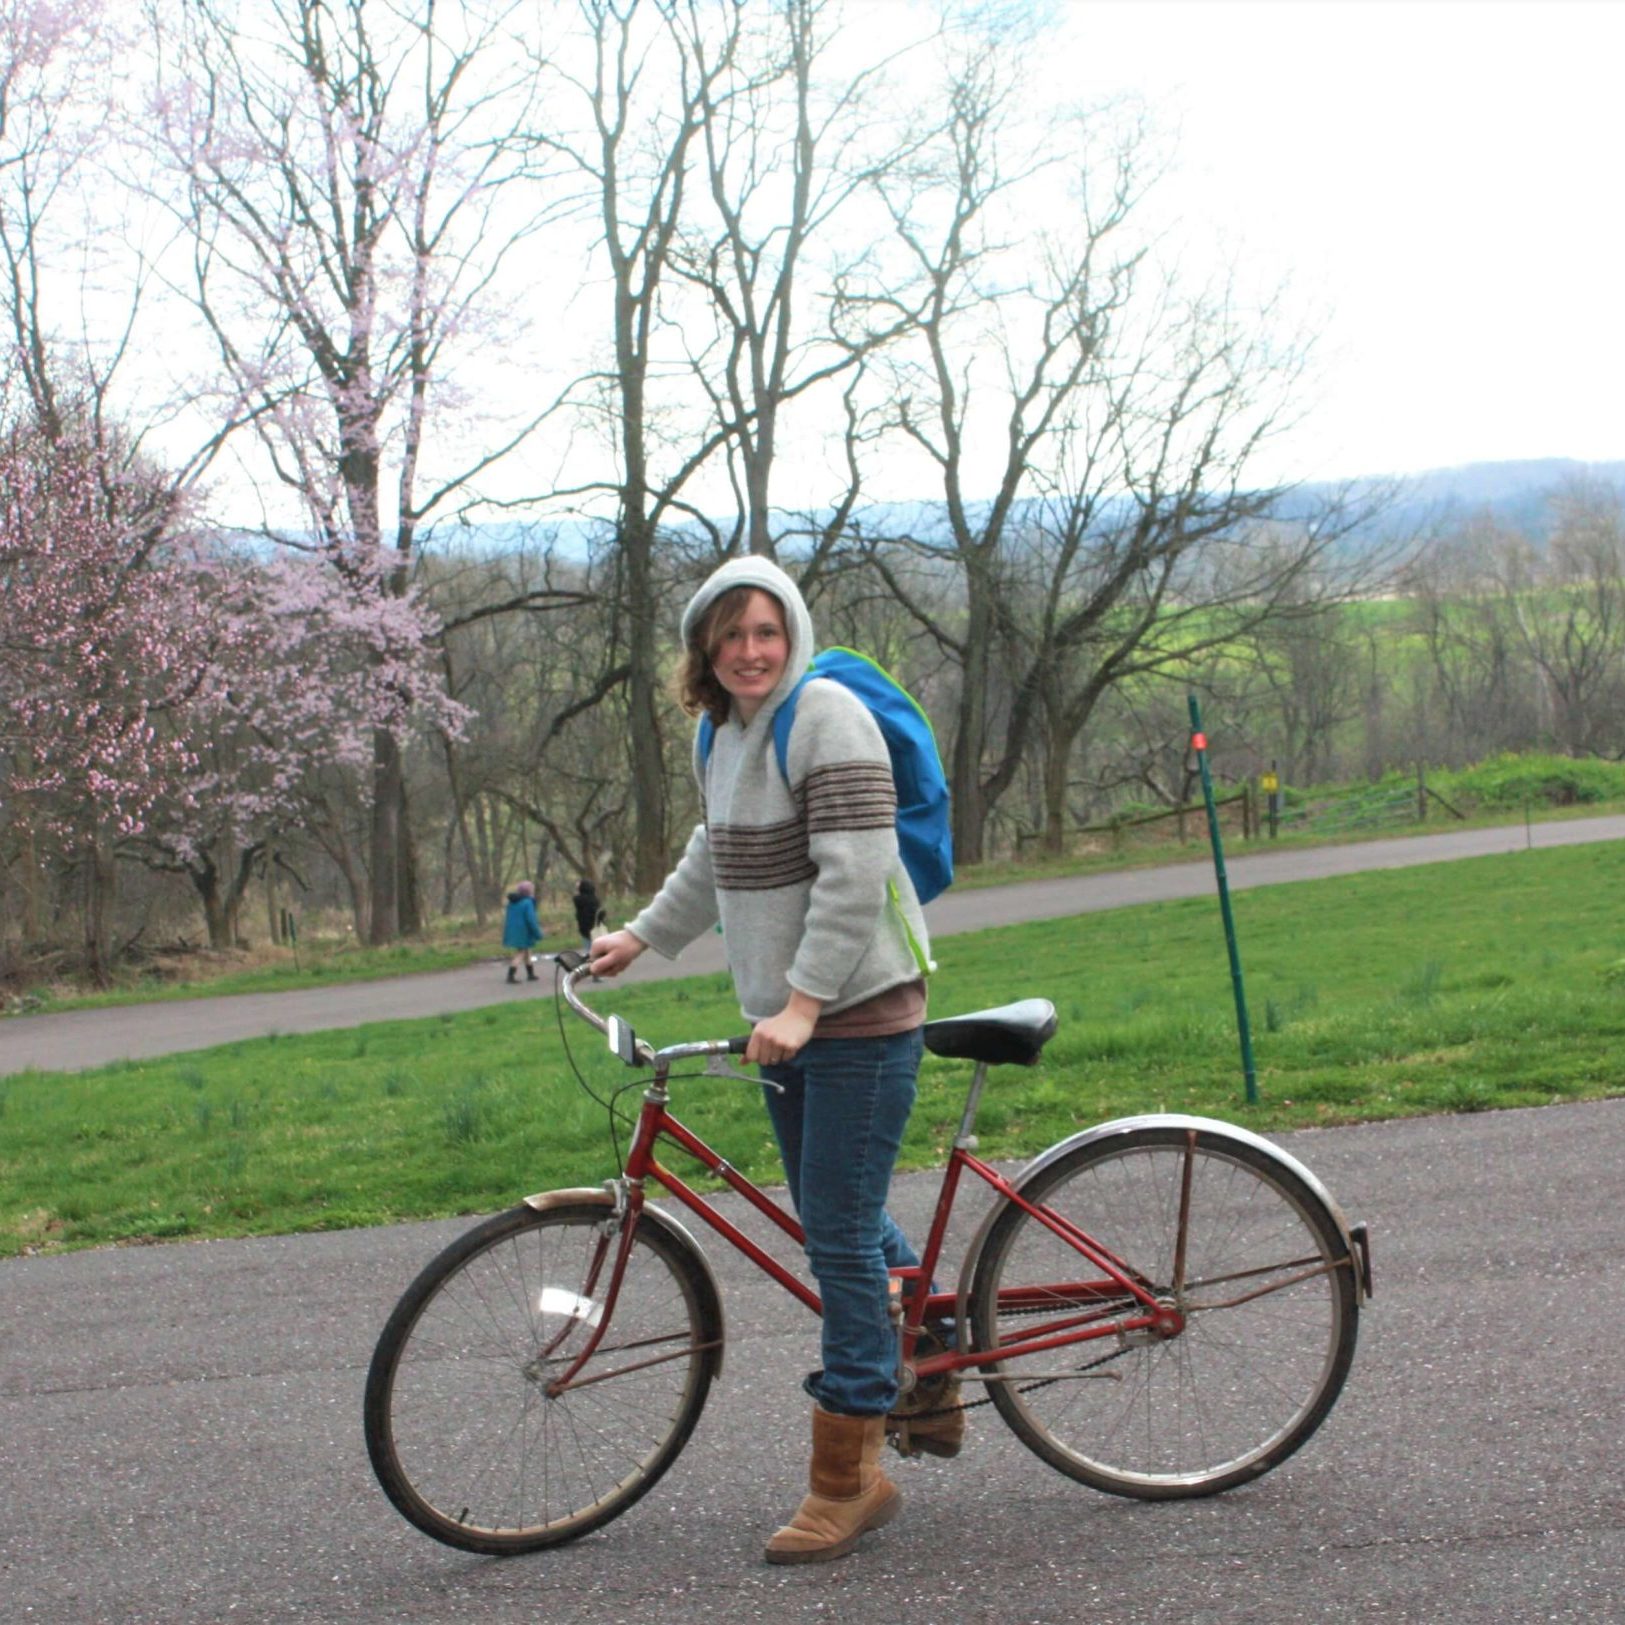 A person wearing a hoodie, winter boots, and a backpack is standing over a bicycle in the road, with a blooming cherry tree, two far away people, and distant hills in the background